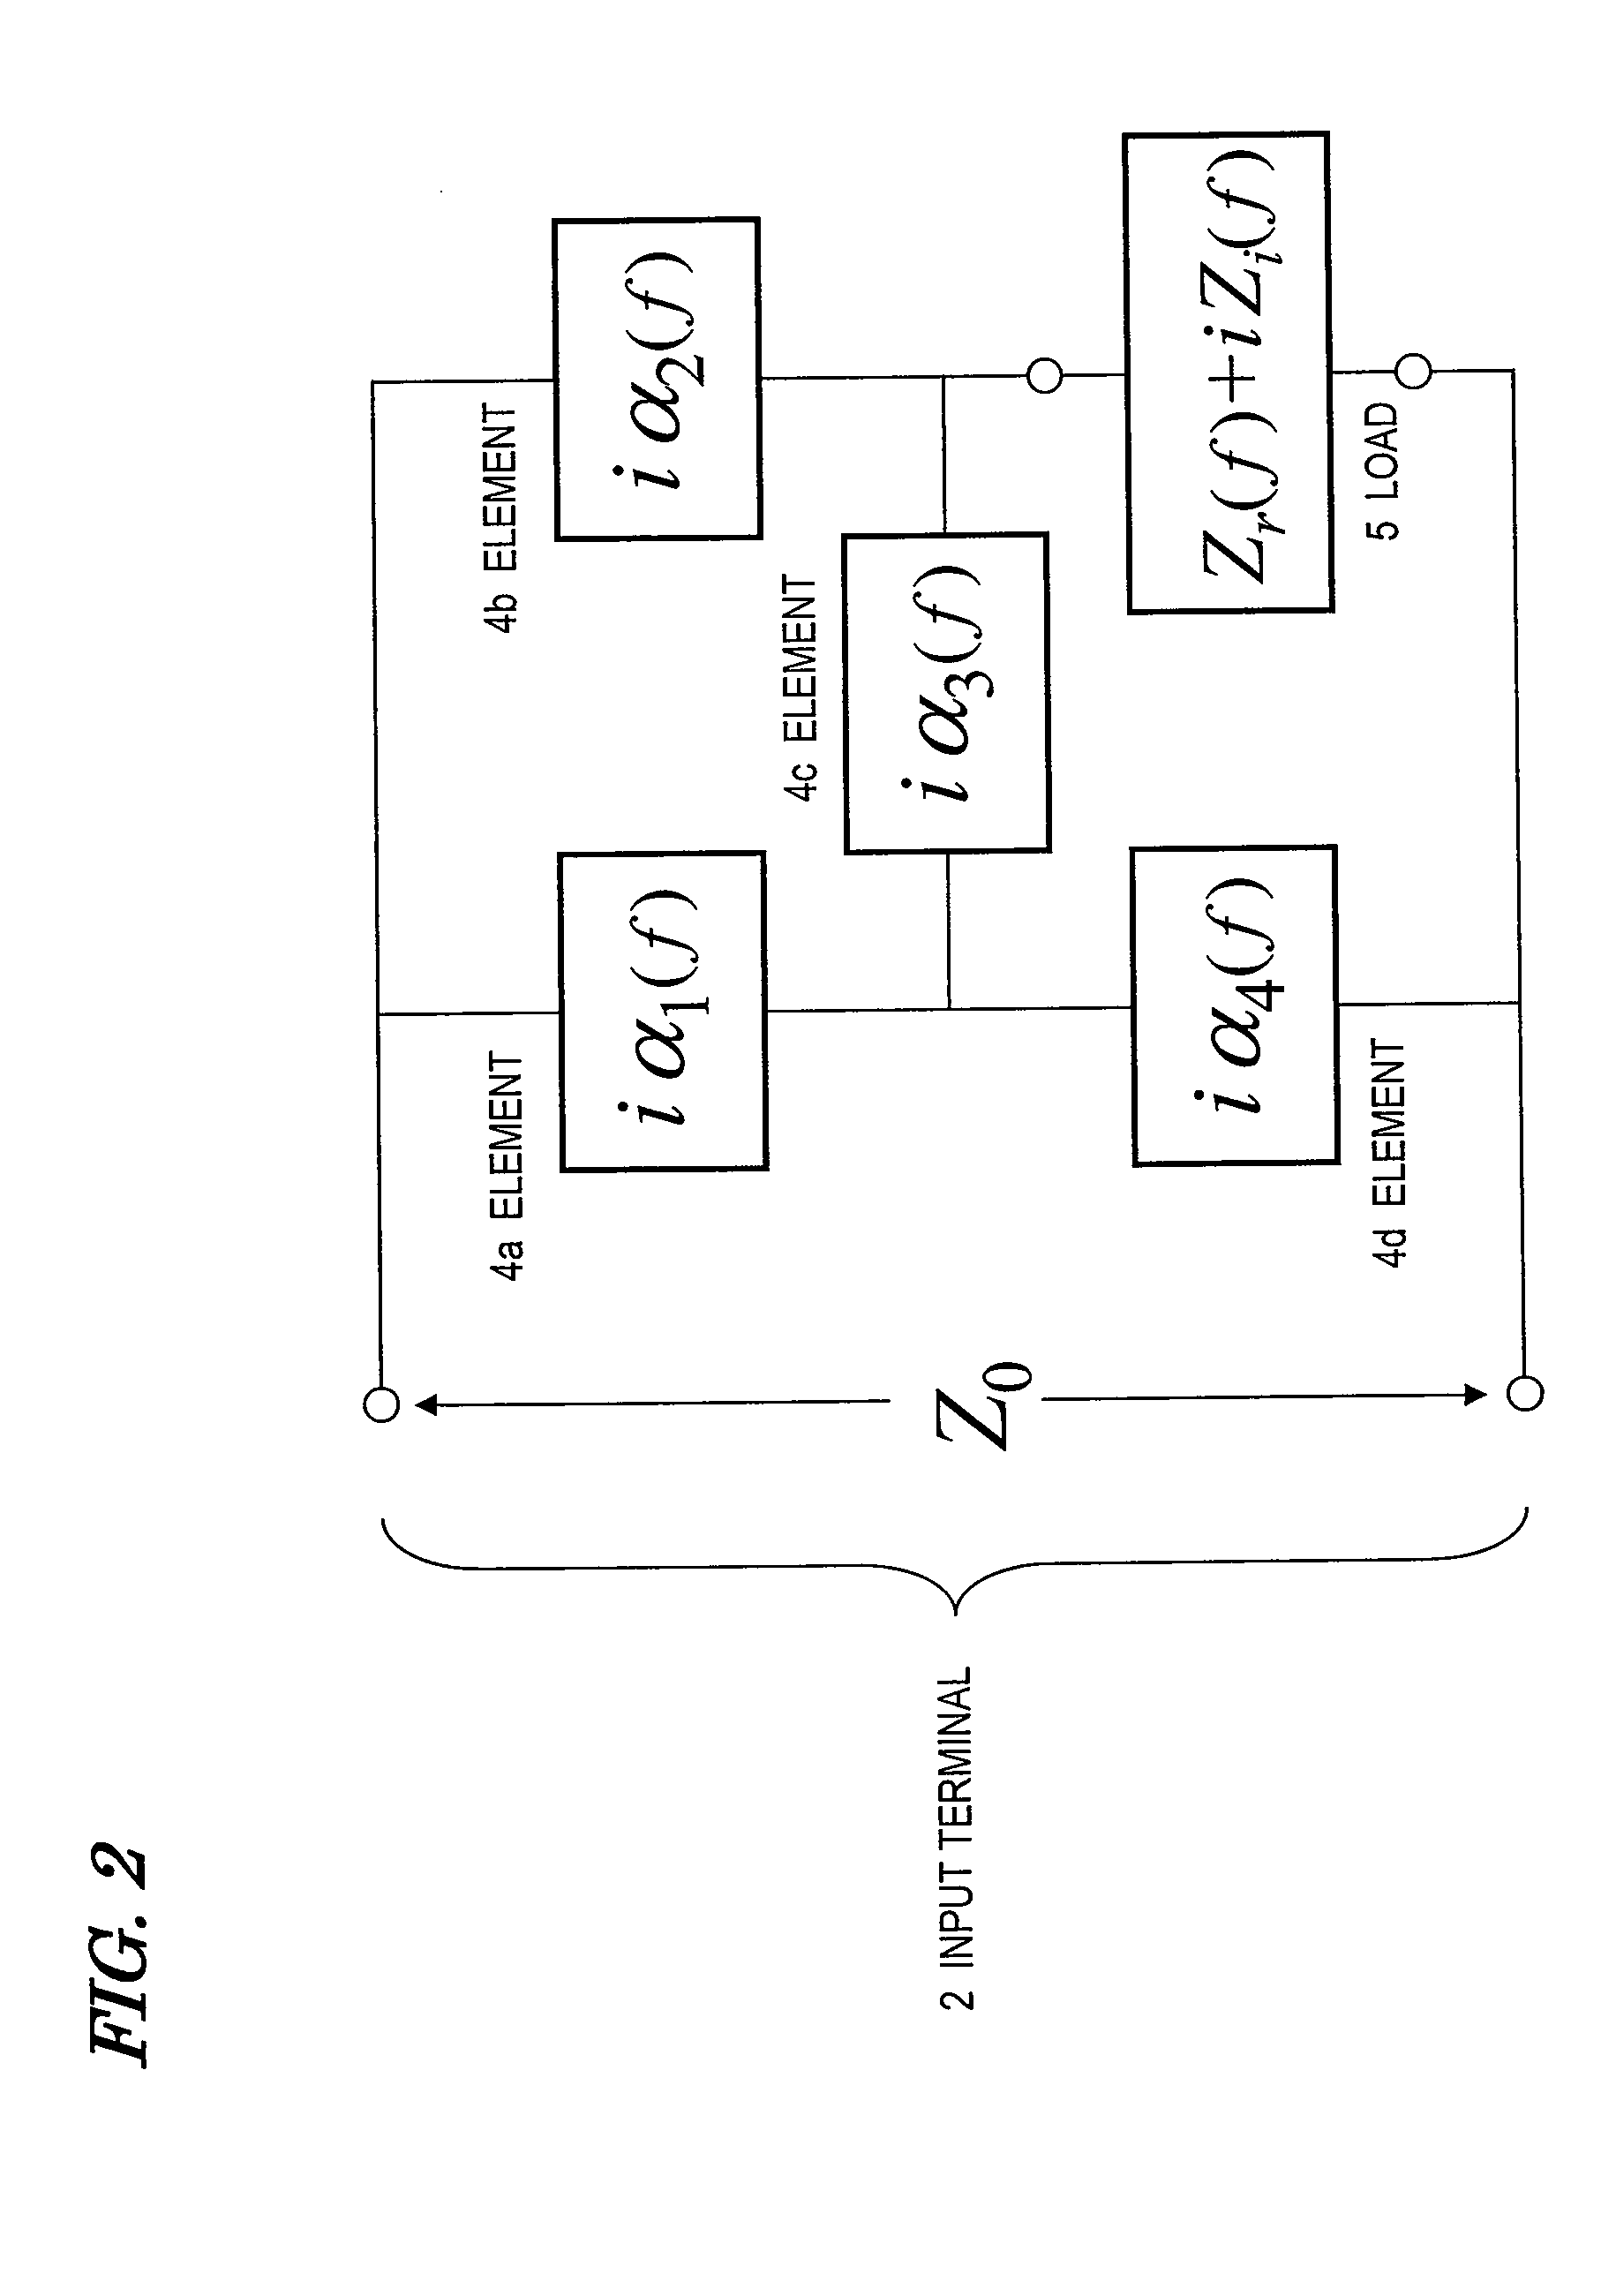 Dual-frequency matching circuit